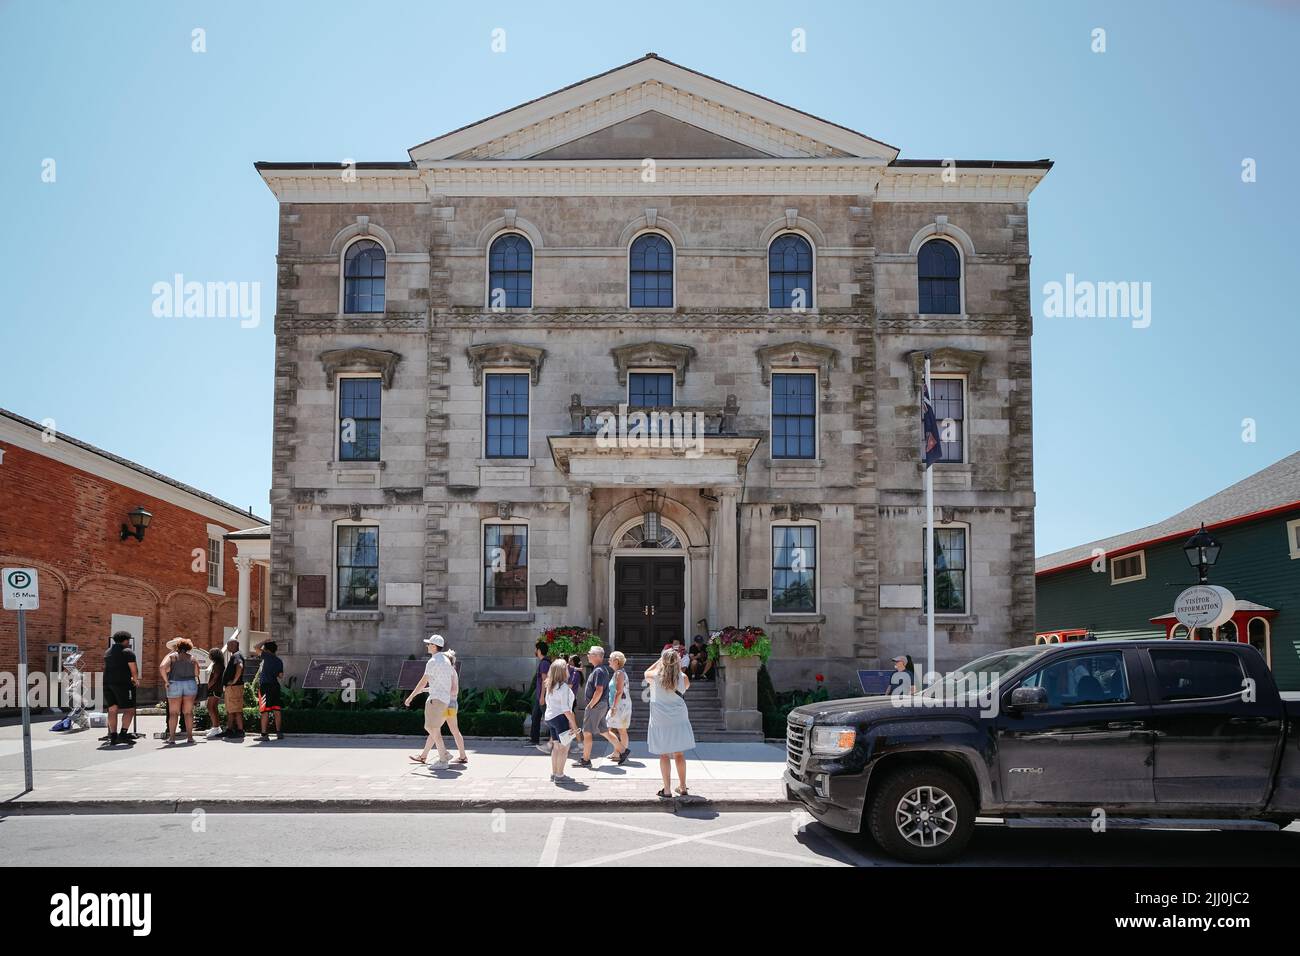 Old court House, Niagara-on-the-Lake, Ontario, Canada Banque D'Images